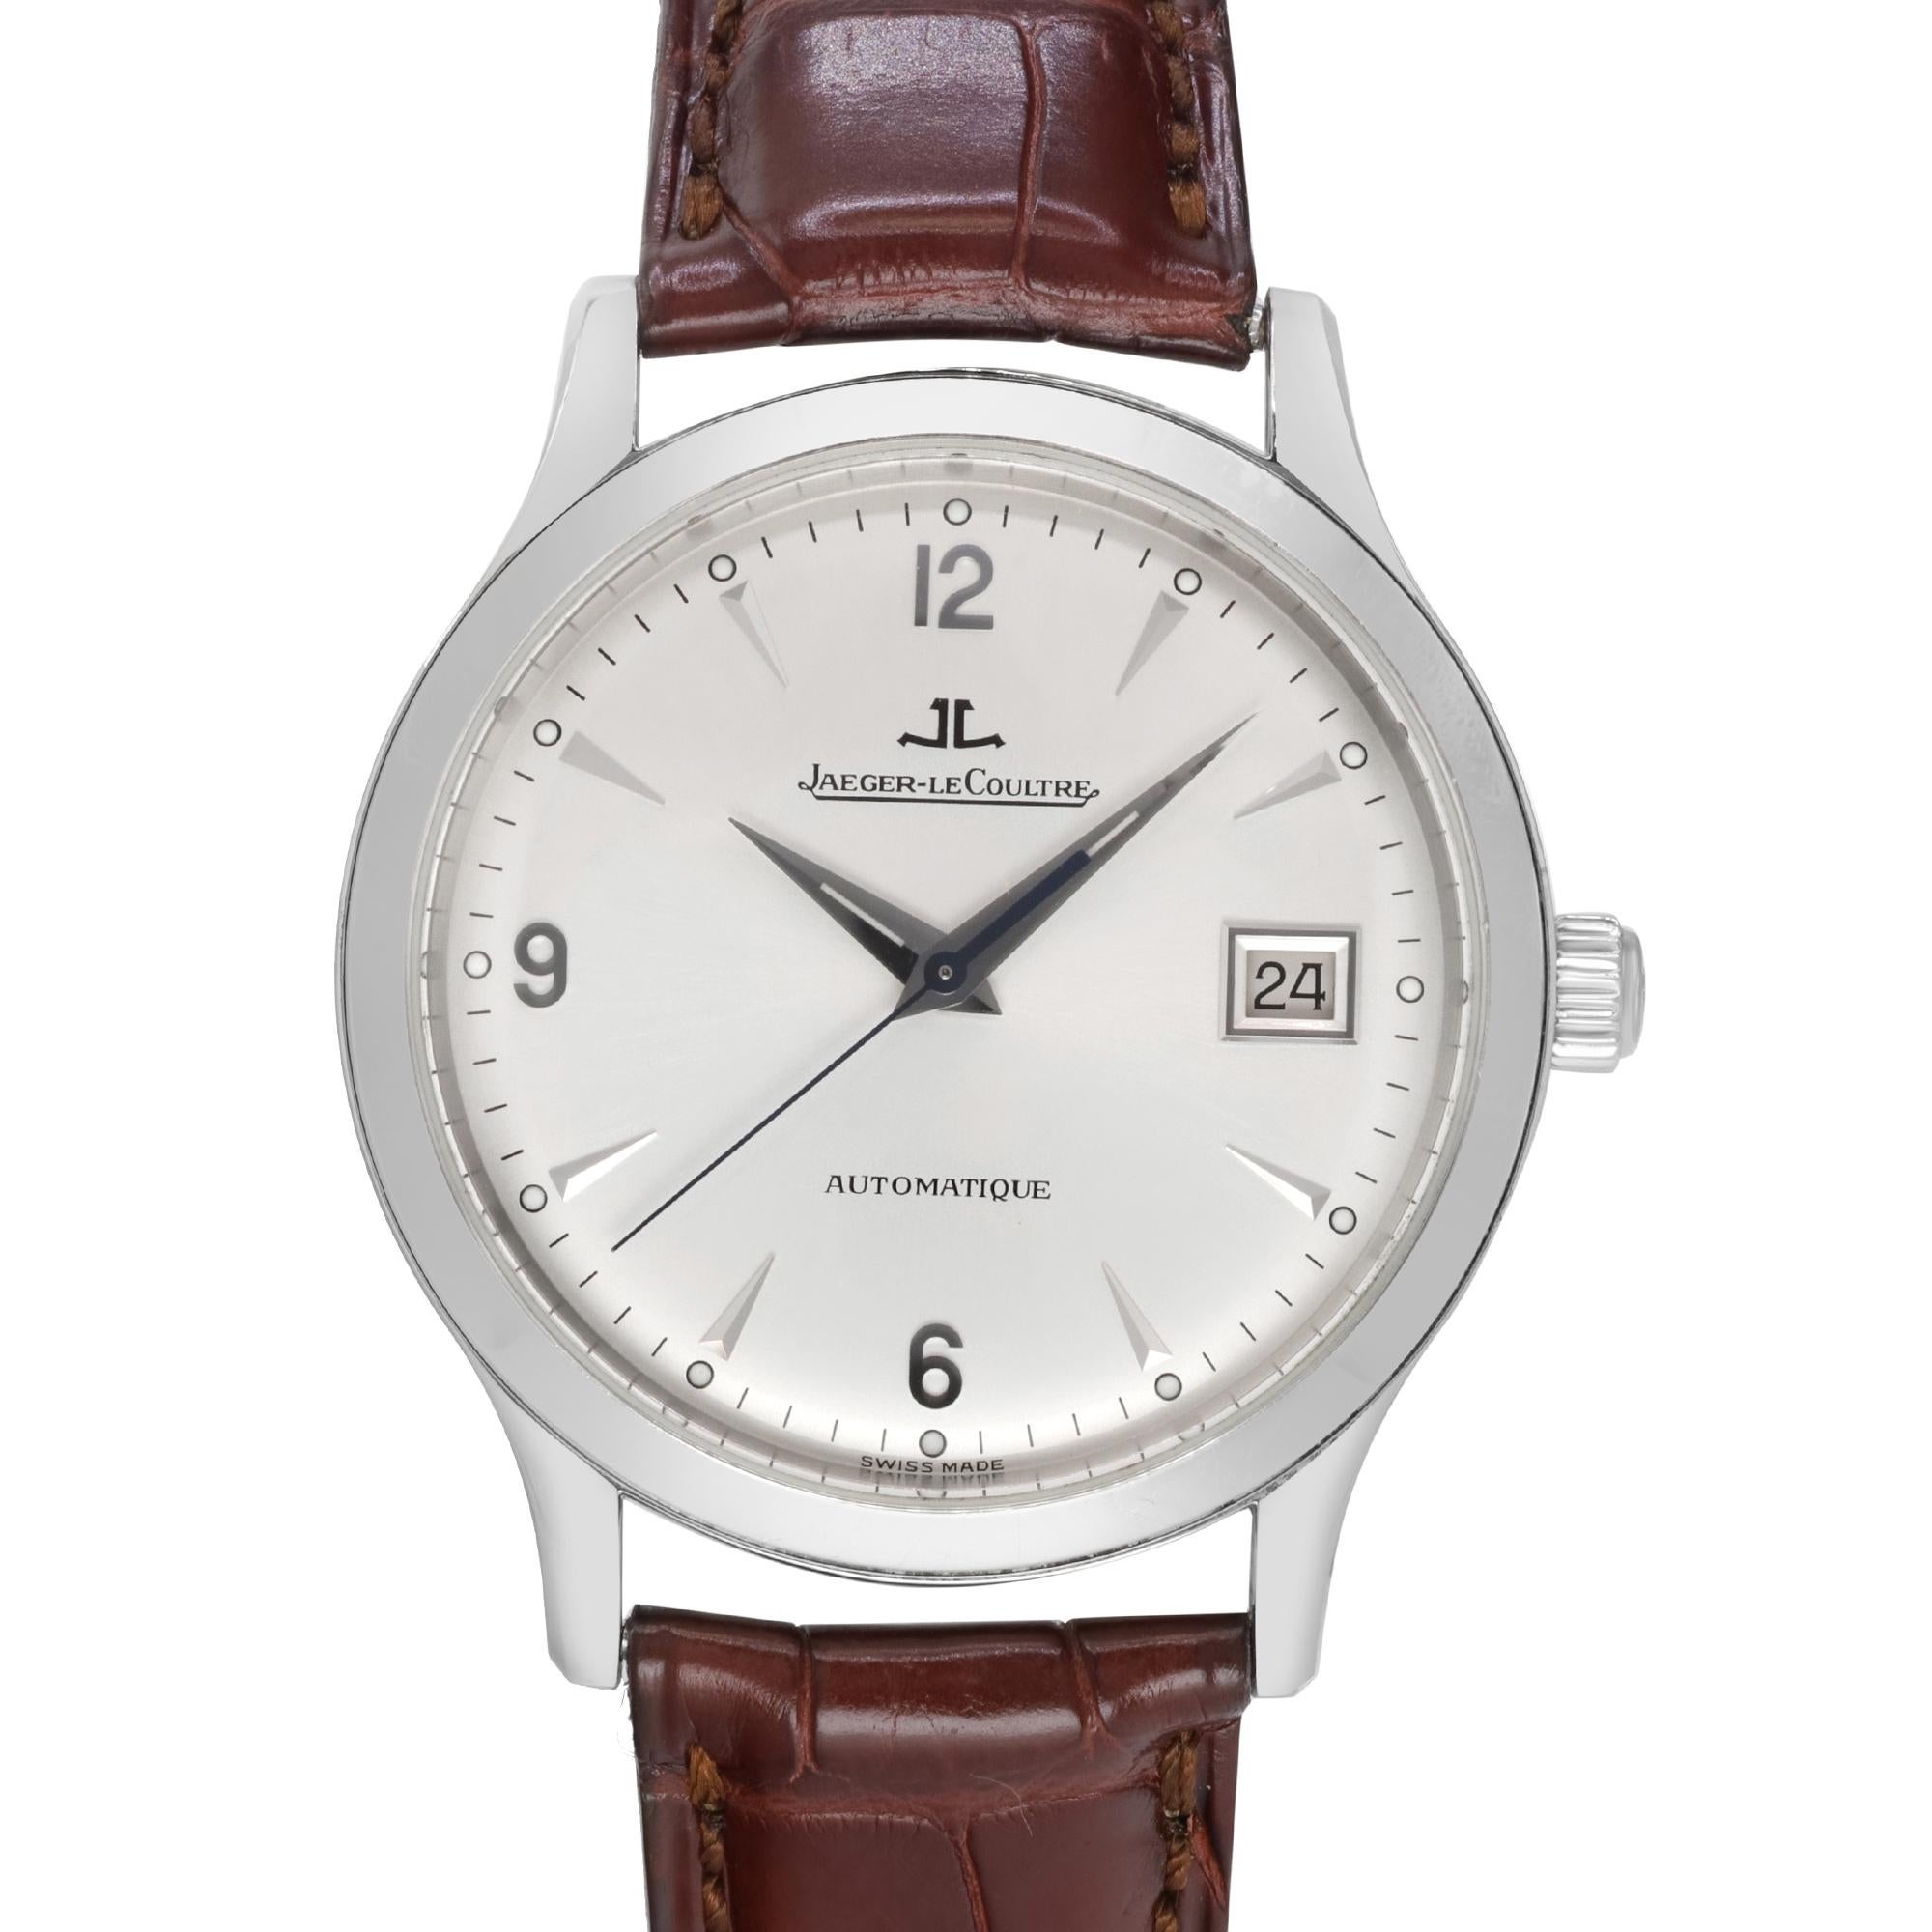 Introduced in 1992 the Master Grande Taille with the new quality control - Master Control 1000 hours (tested encased for 1000 hours!). This pre-owned Jaeger-LeCoultre Master Control Grande Taille 140.8.89 is a beautiful men's timepiece that is